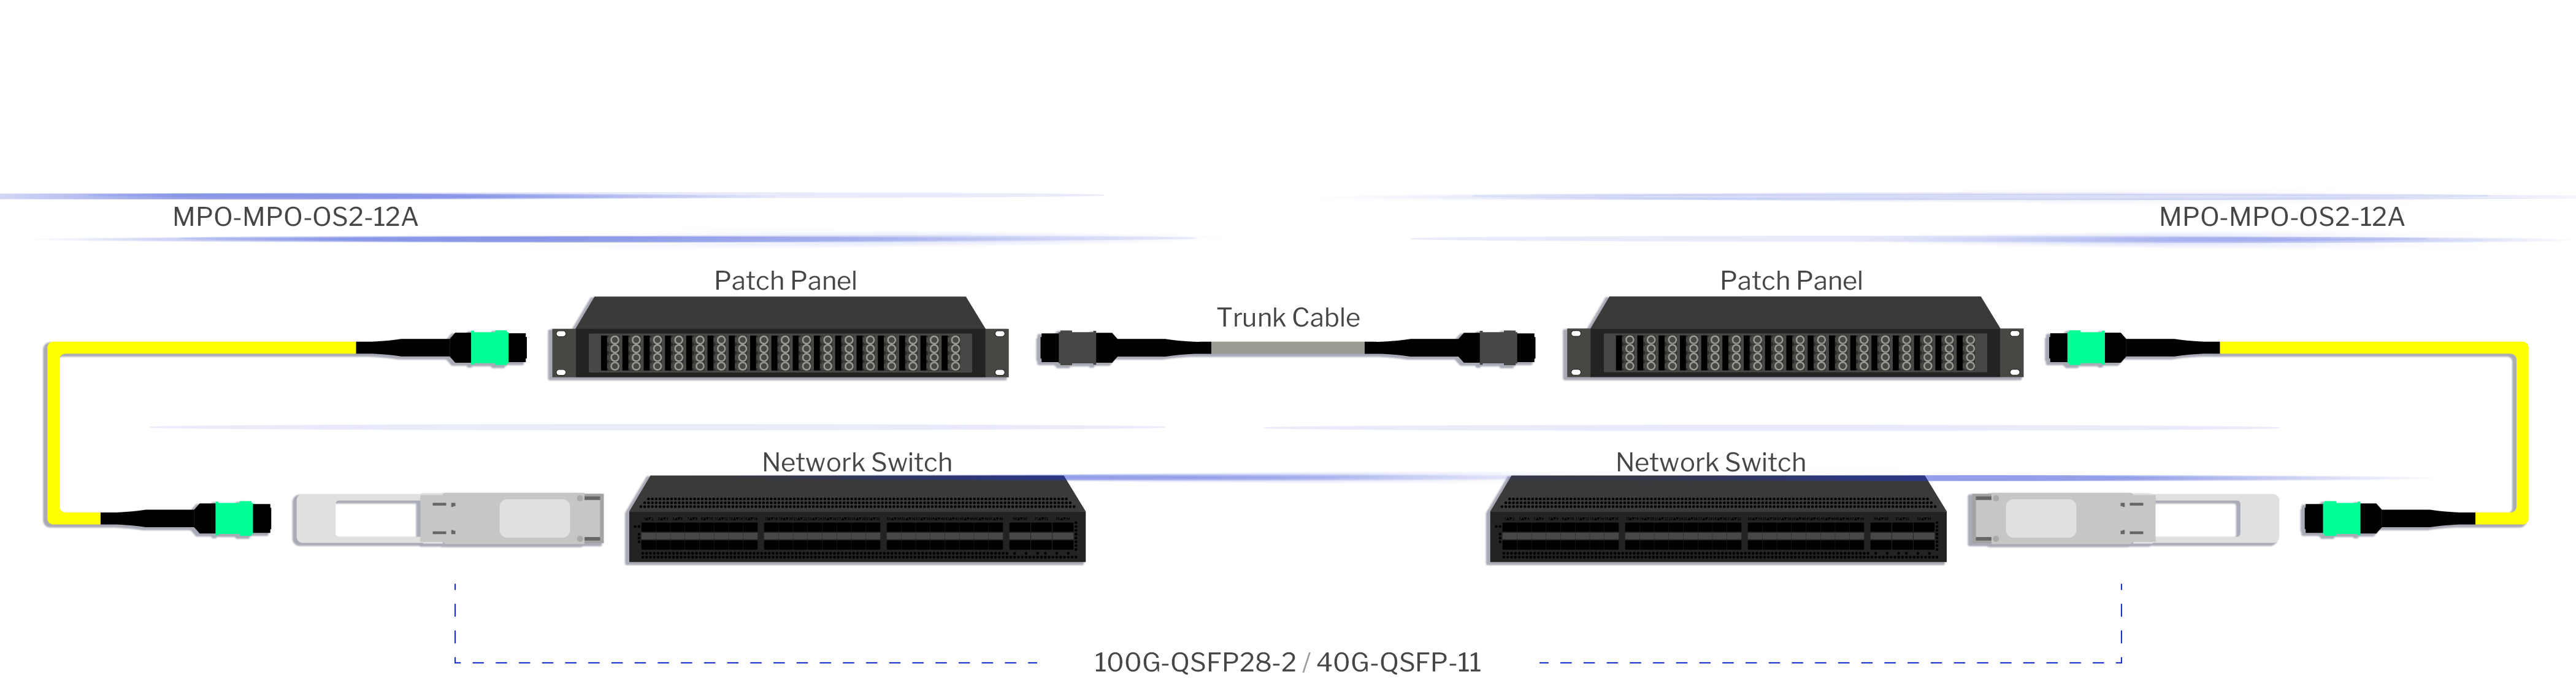 MPO-MPO-OS2-12A Patch Cable Connectivity Solution